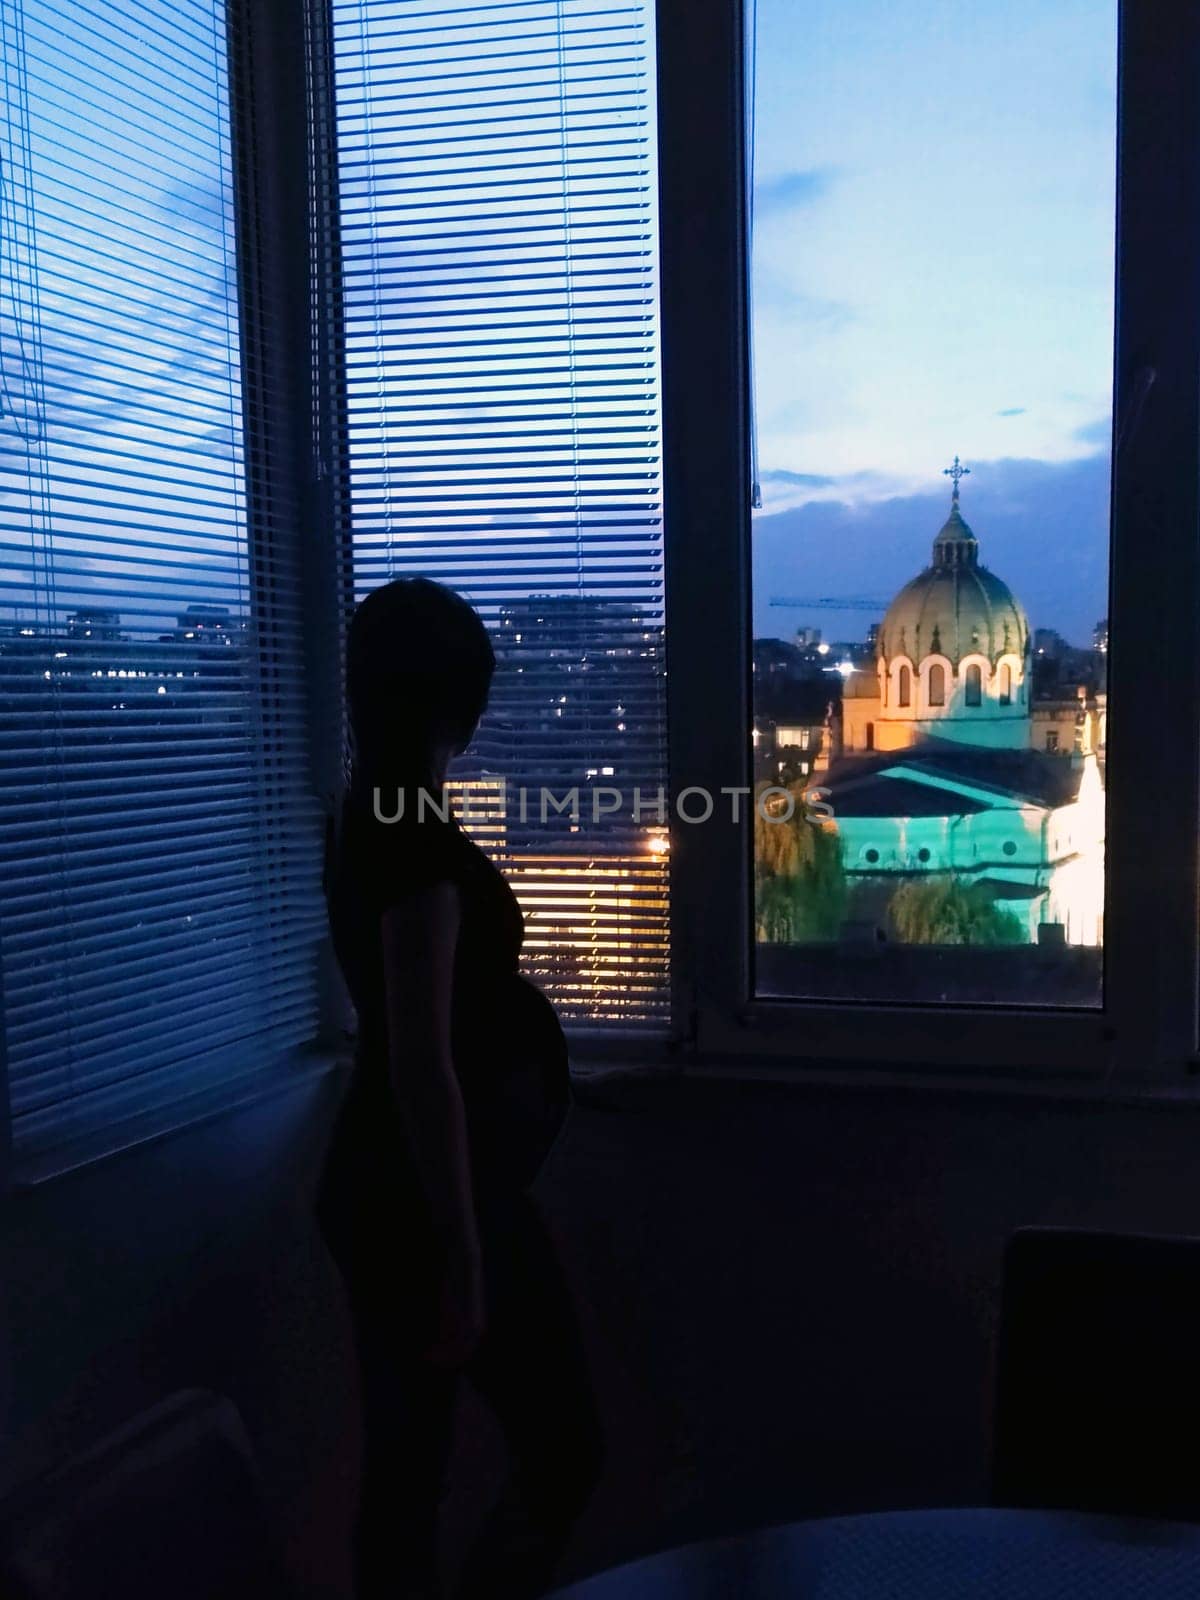 a pregnant woman thoughtfully looks out the window at the cathedral in the evening by Annado